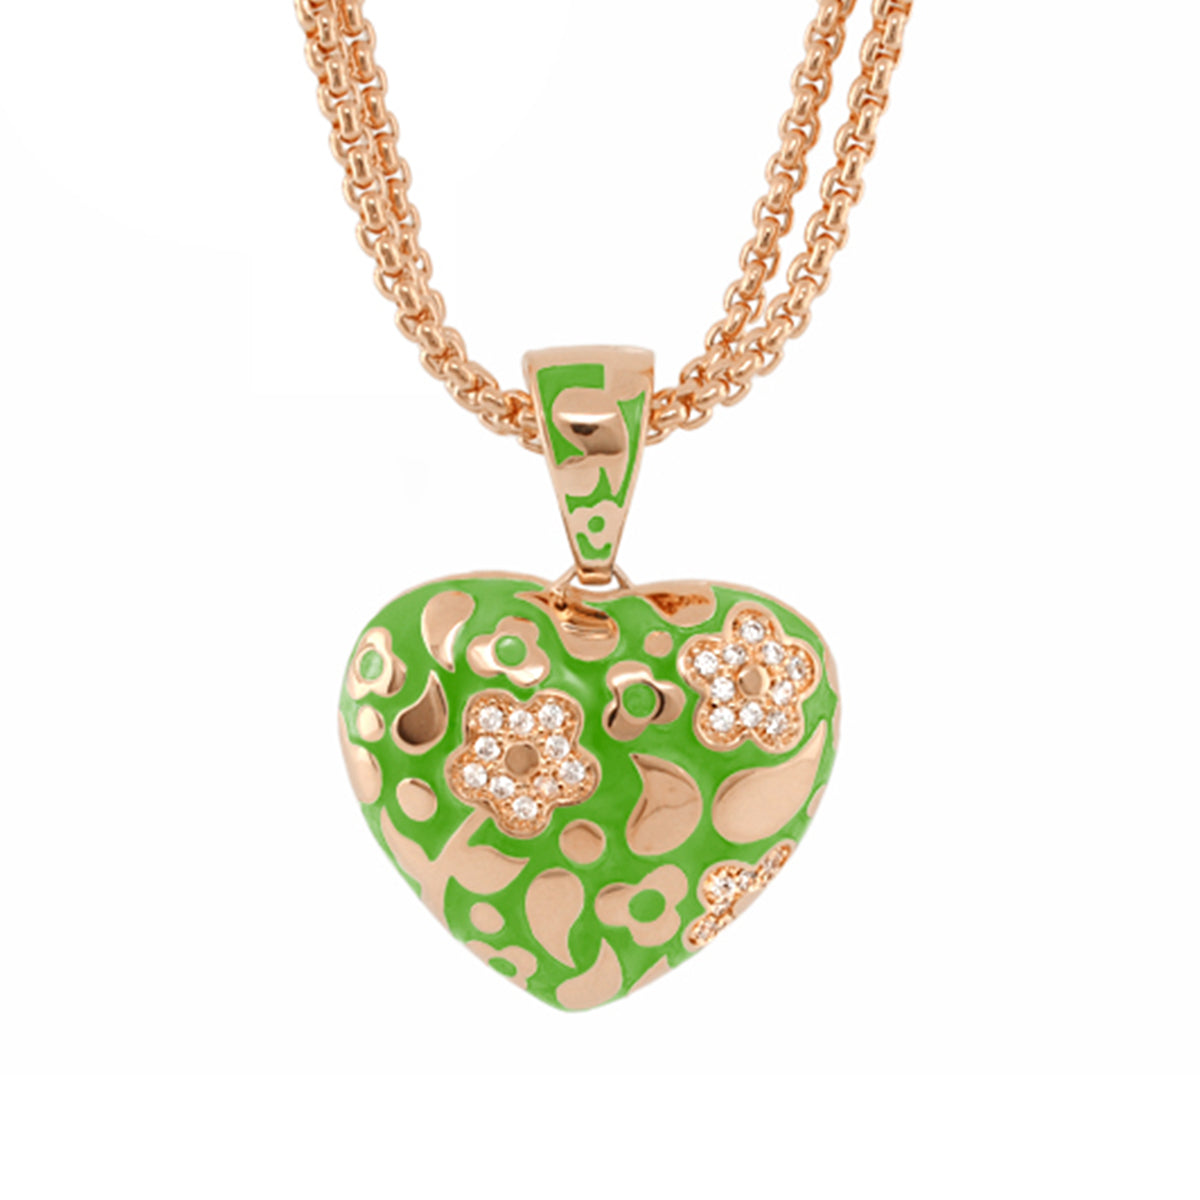 Flowers by Orly Necklace